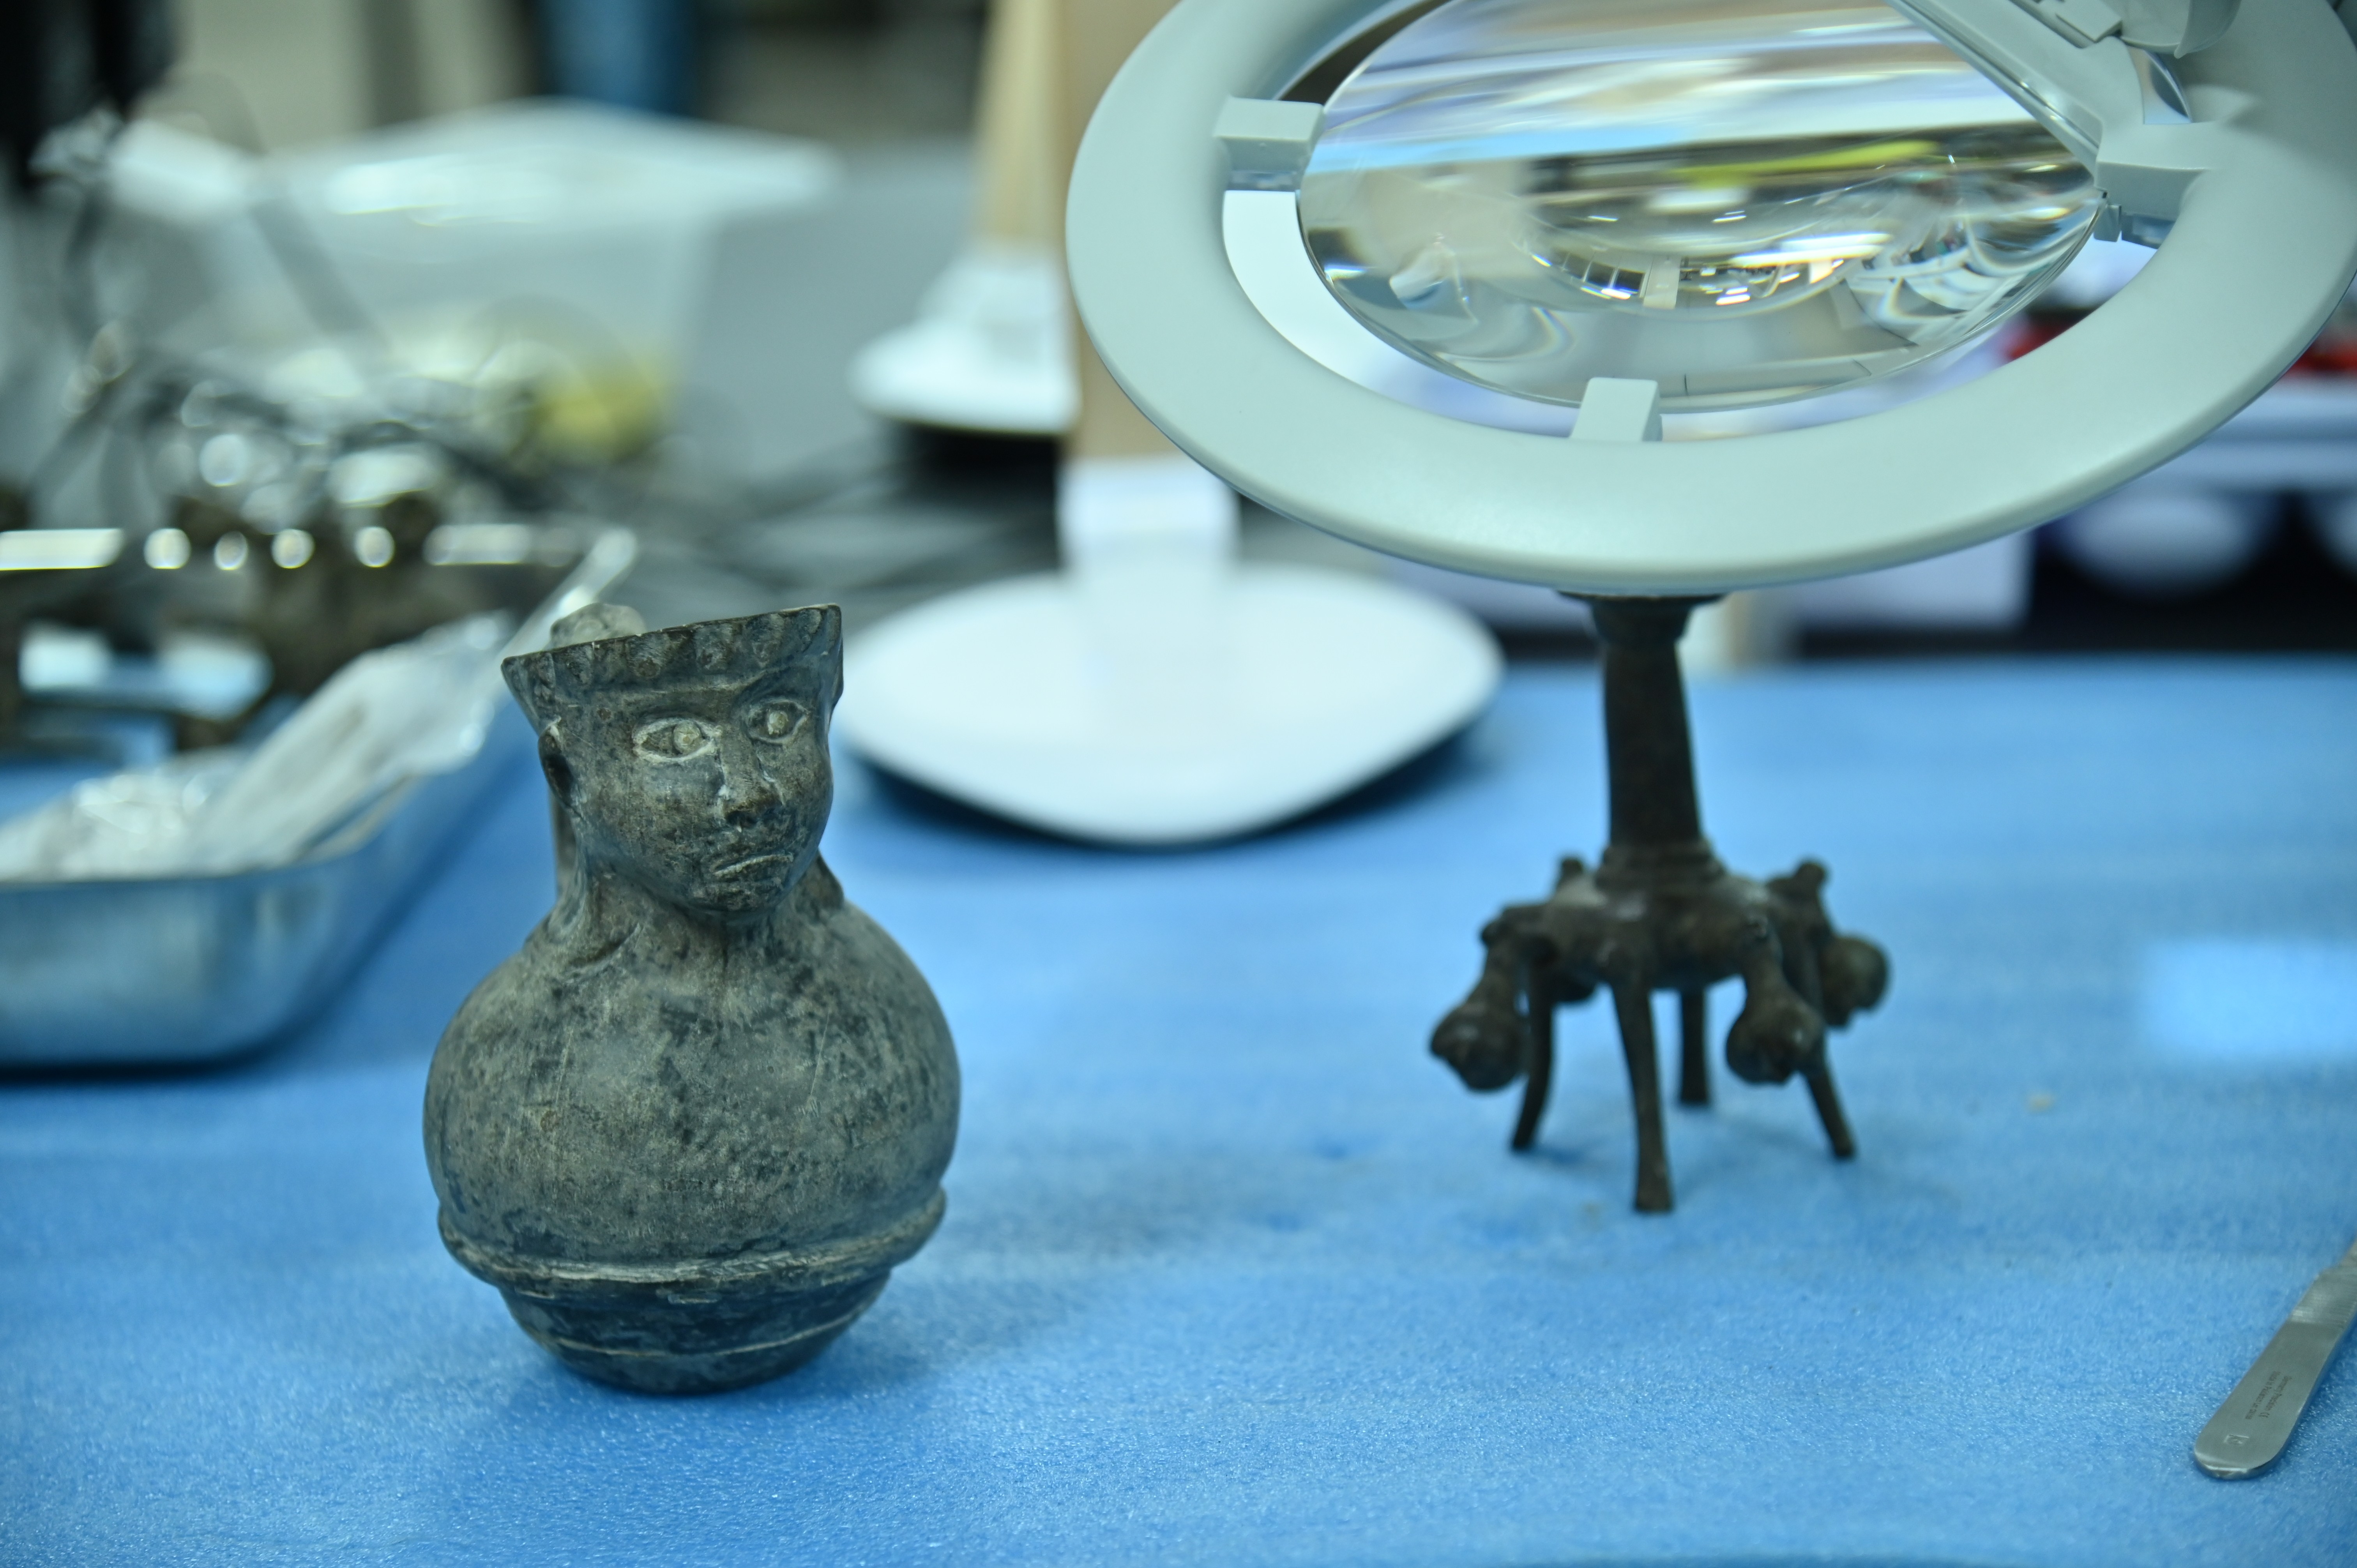 The captivating glimpse of the Artifact under conservation process